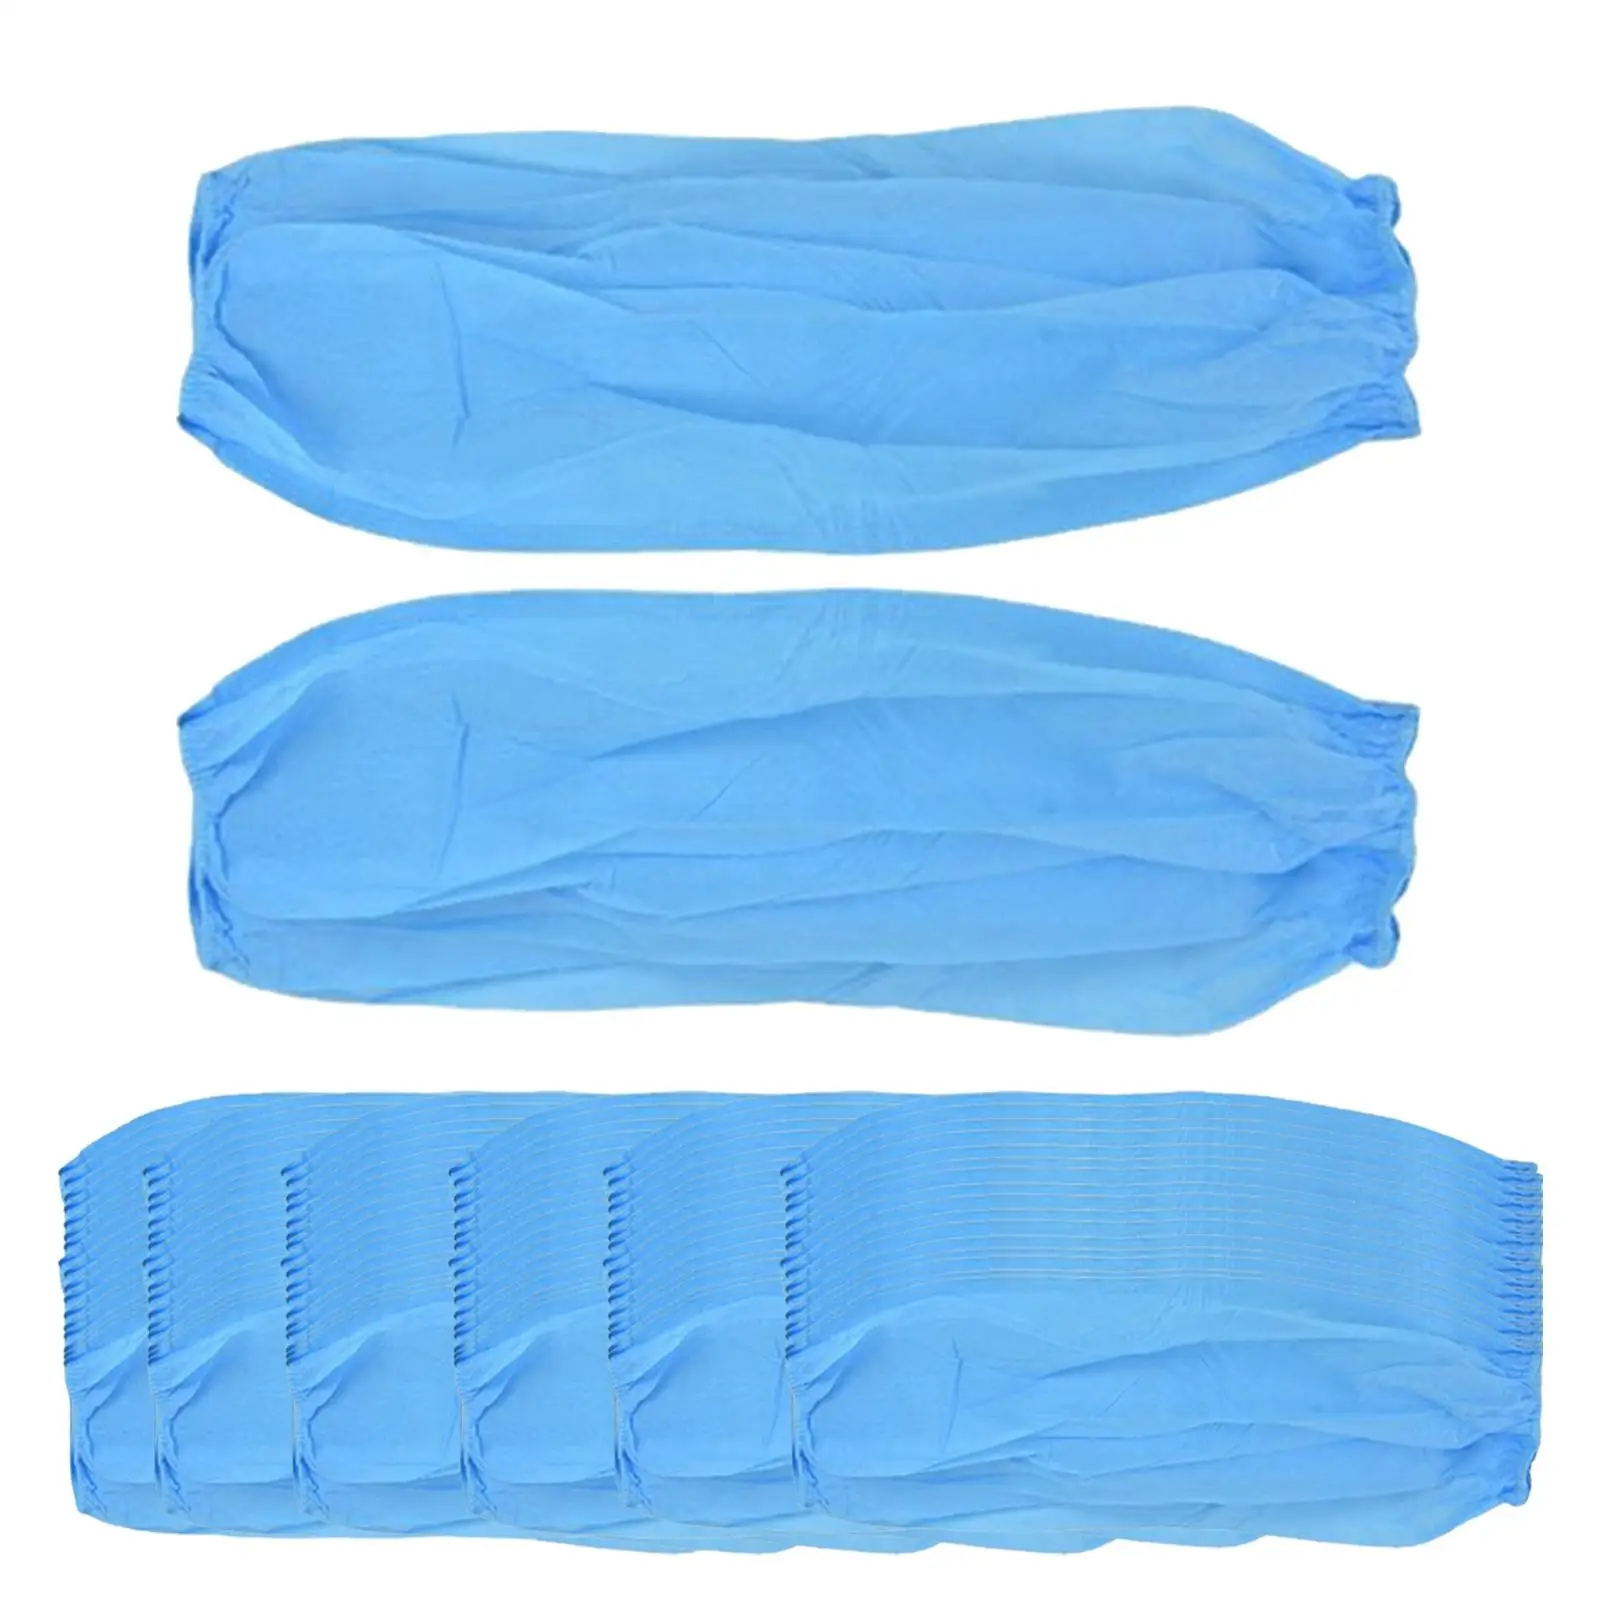 100 Pieces Disposable Arms Sleeves Covers Non Woven Fabric Durable Professional Lightweight